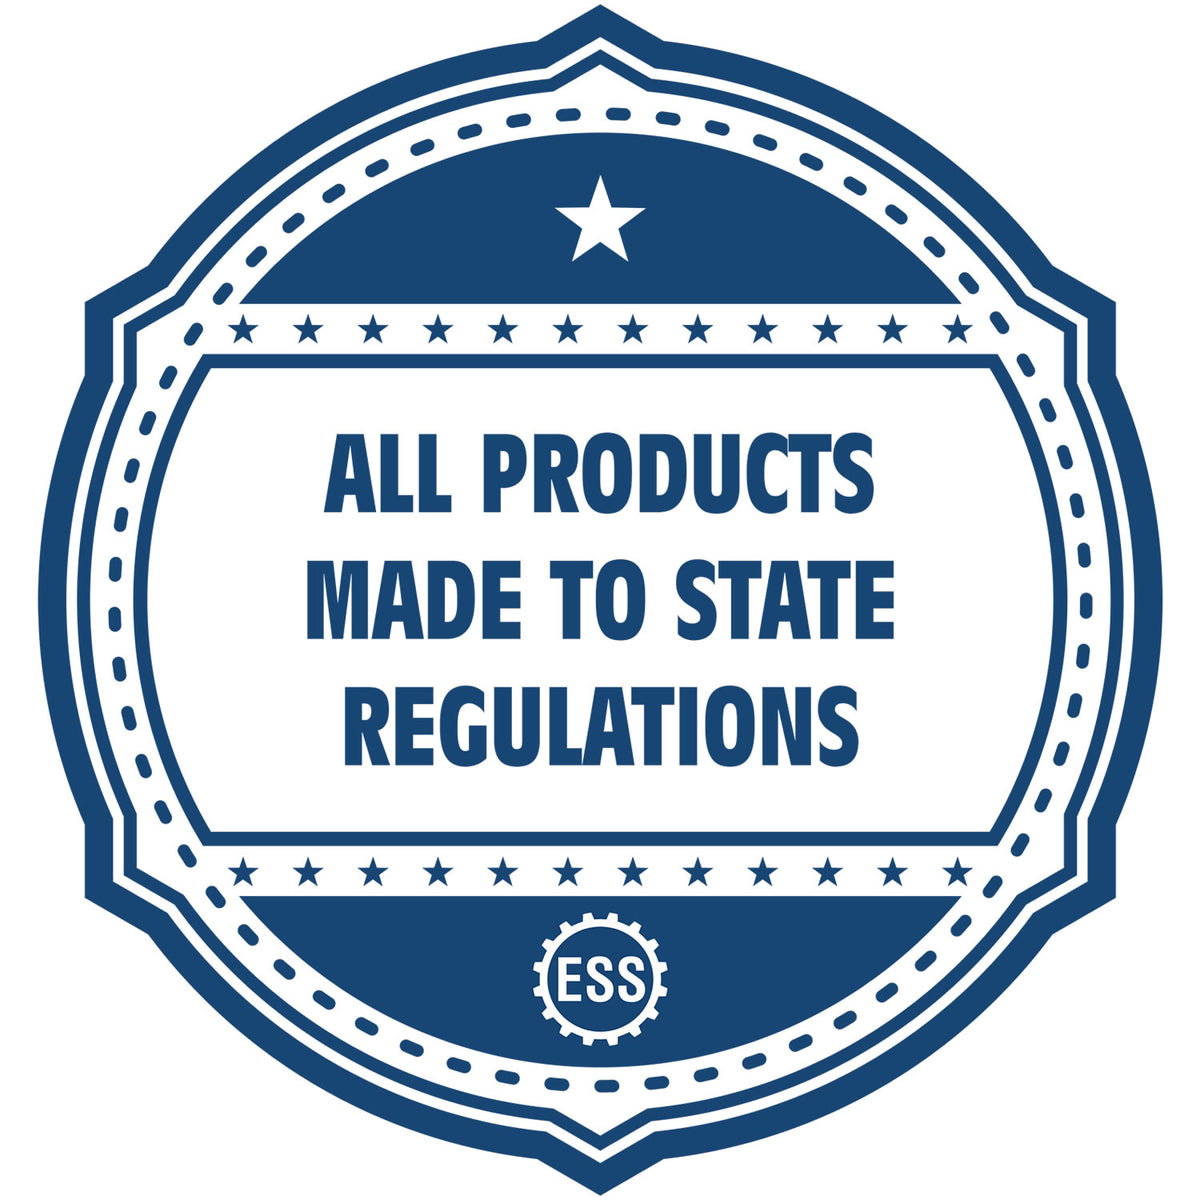 An icon or badge element for the Heavy Duty Cast Iron Missouri Land Surveyor Seal Embosser showing that this product is made in compliance with state regulations.